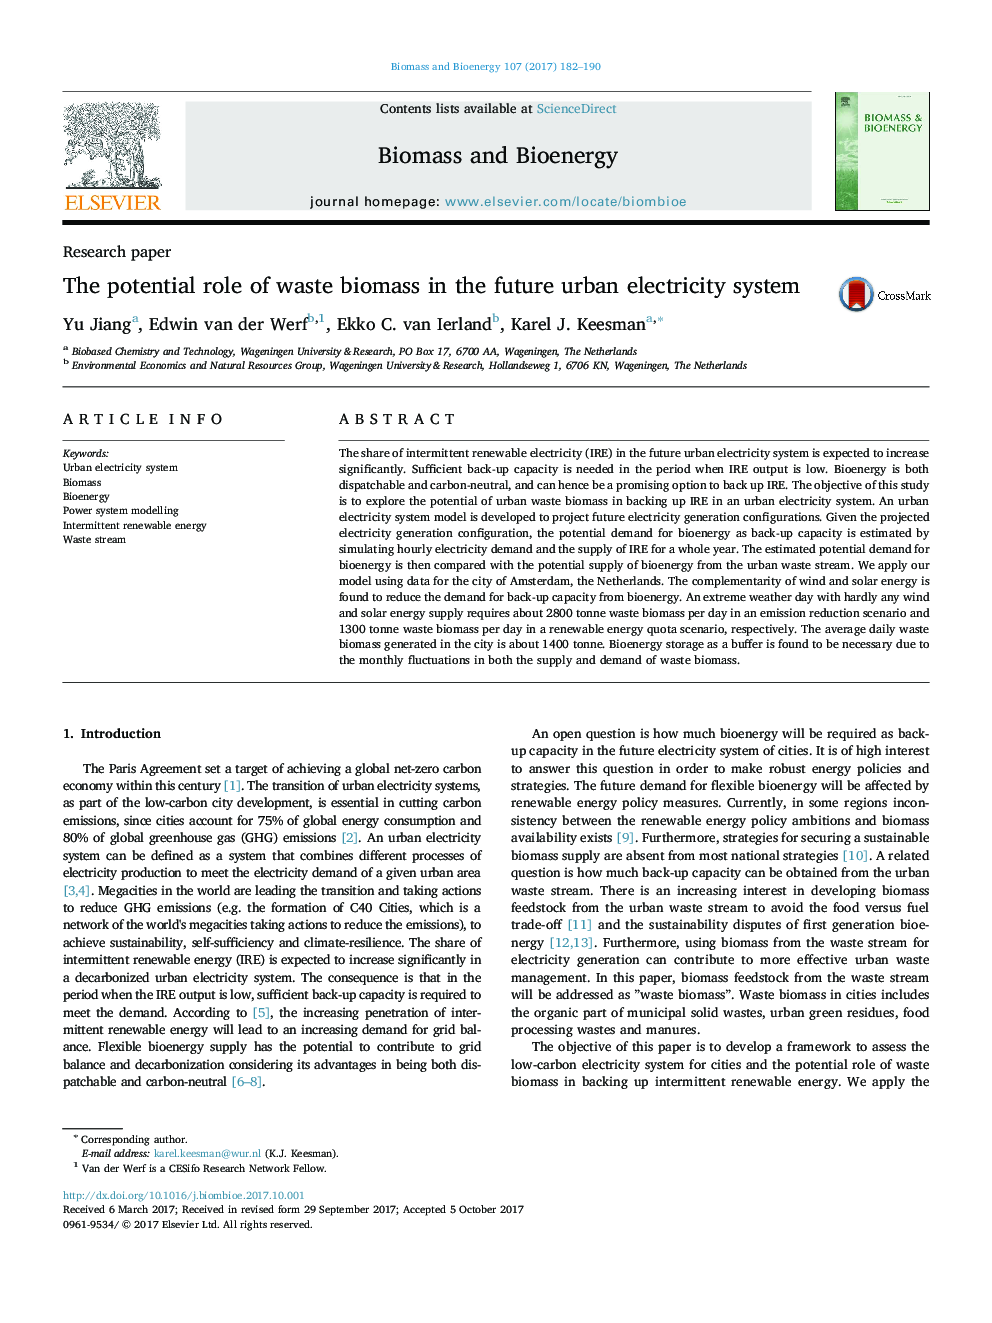 The potential role of waste biomass in the future urban electricity system